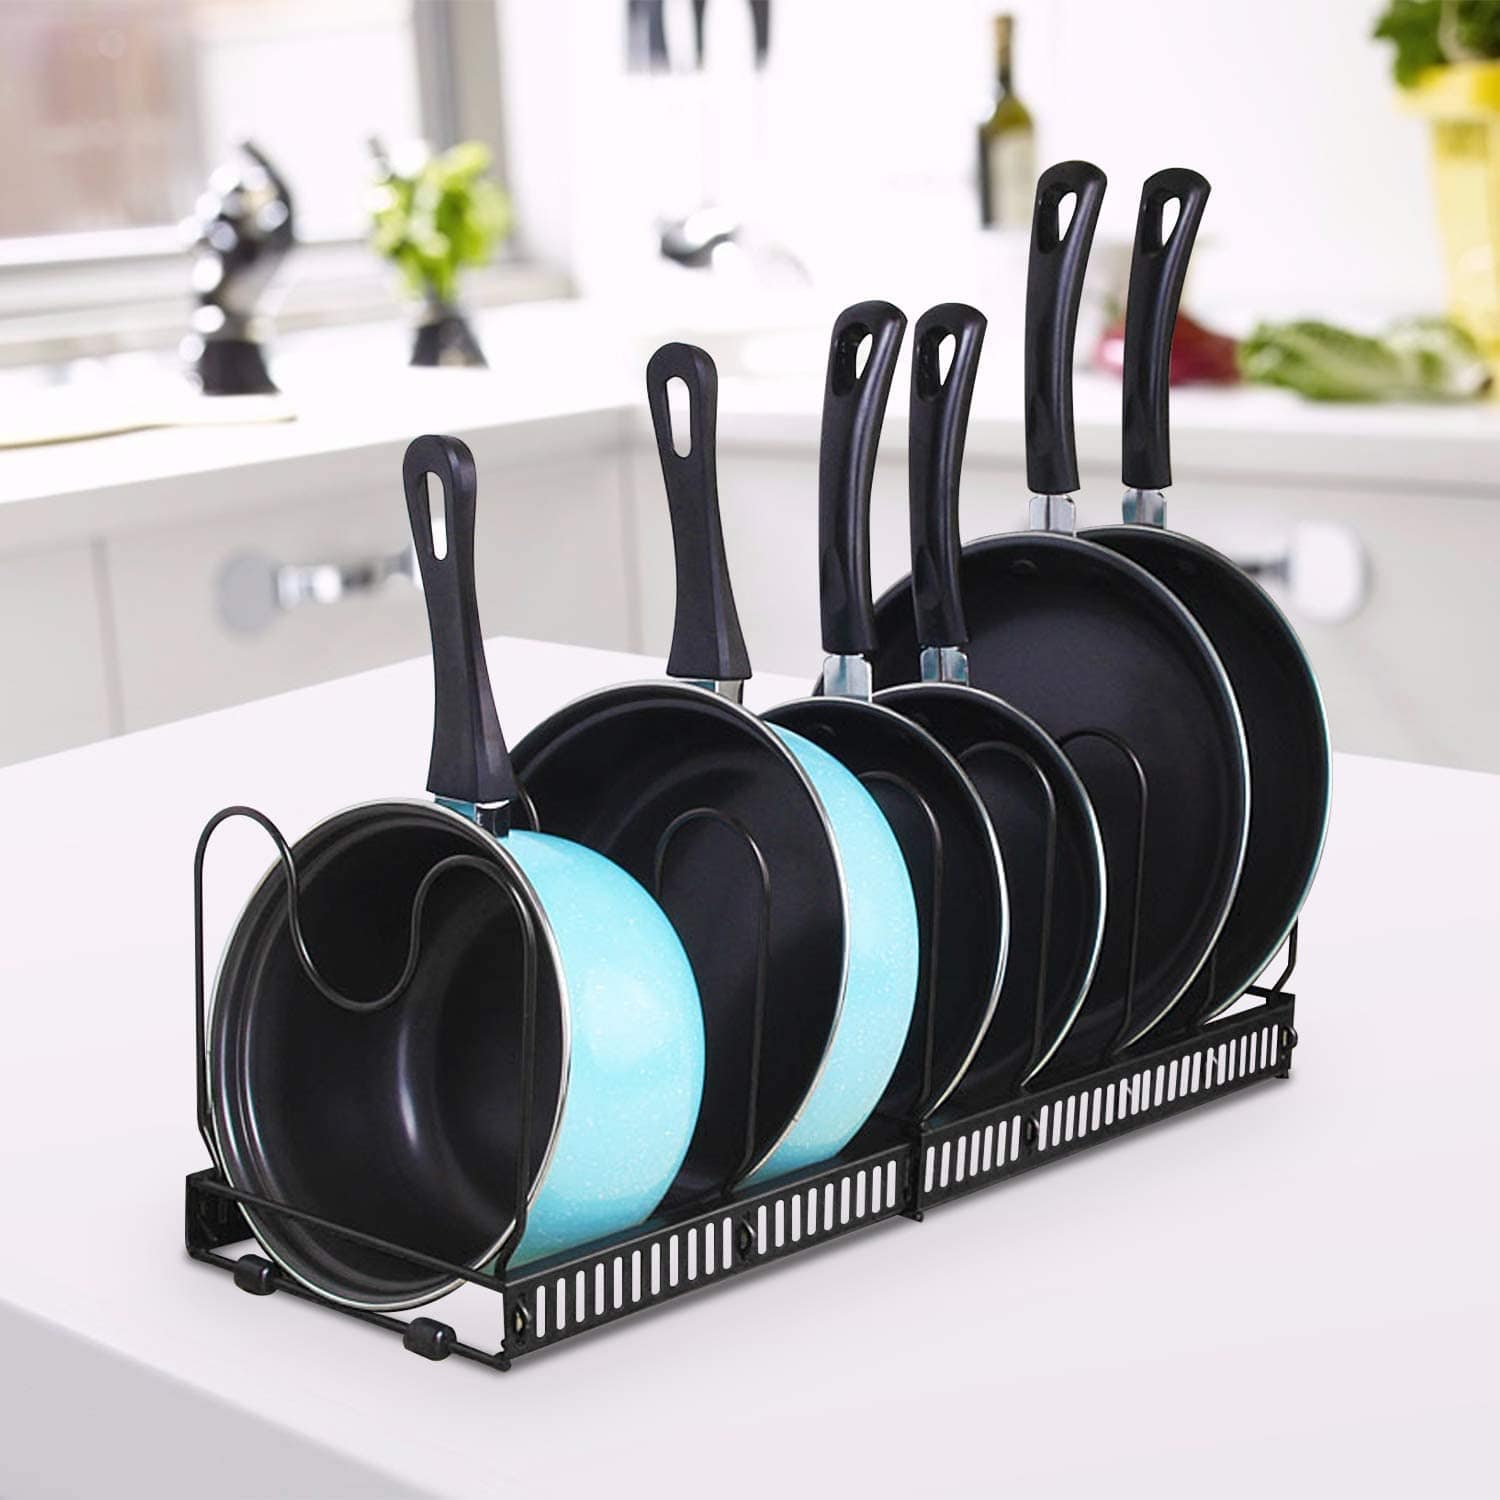 PEISI Pot Rack Pot And Pan Organizer For Cabinet Kitchen Holder